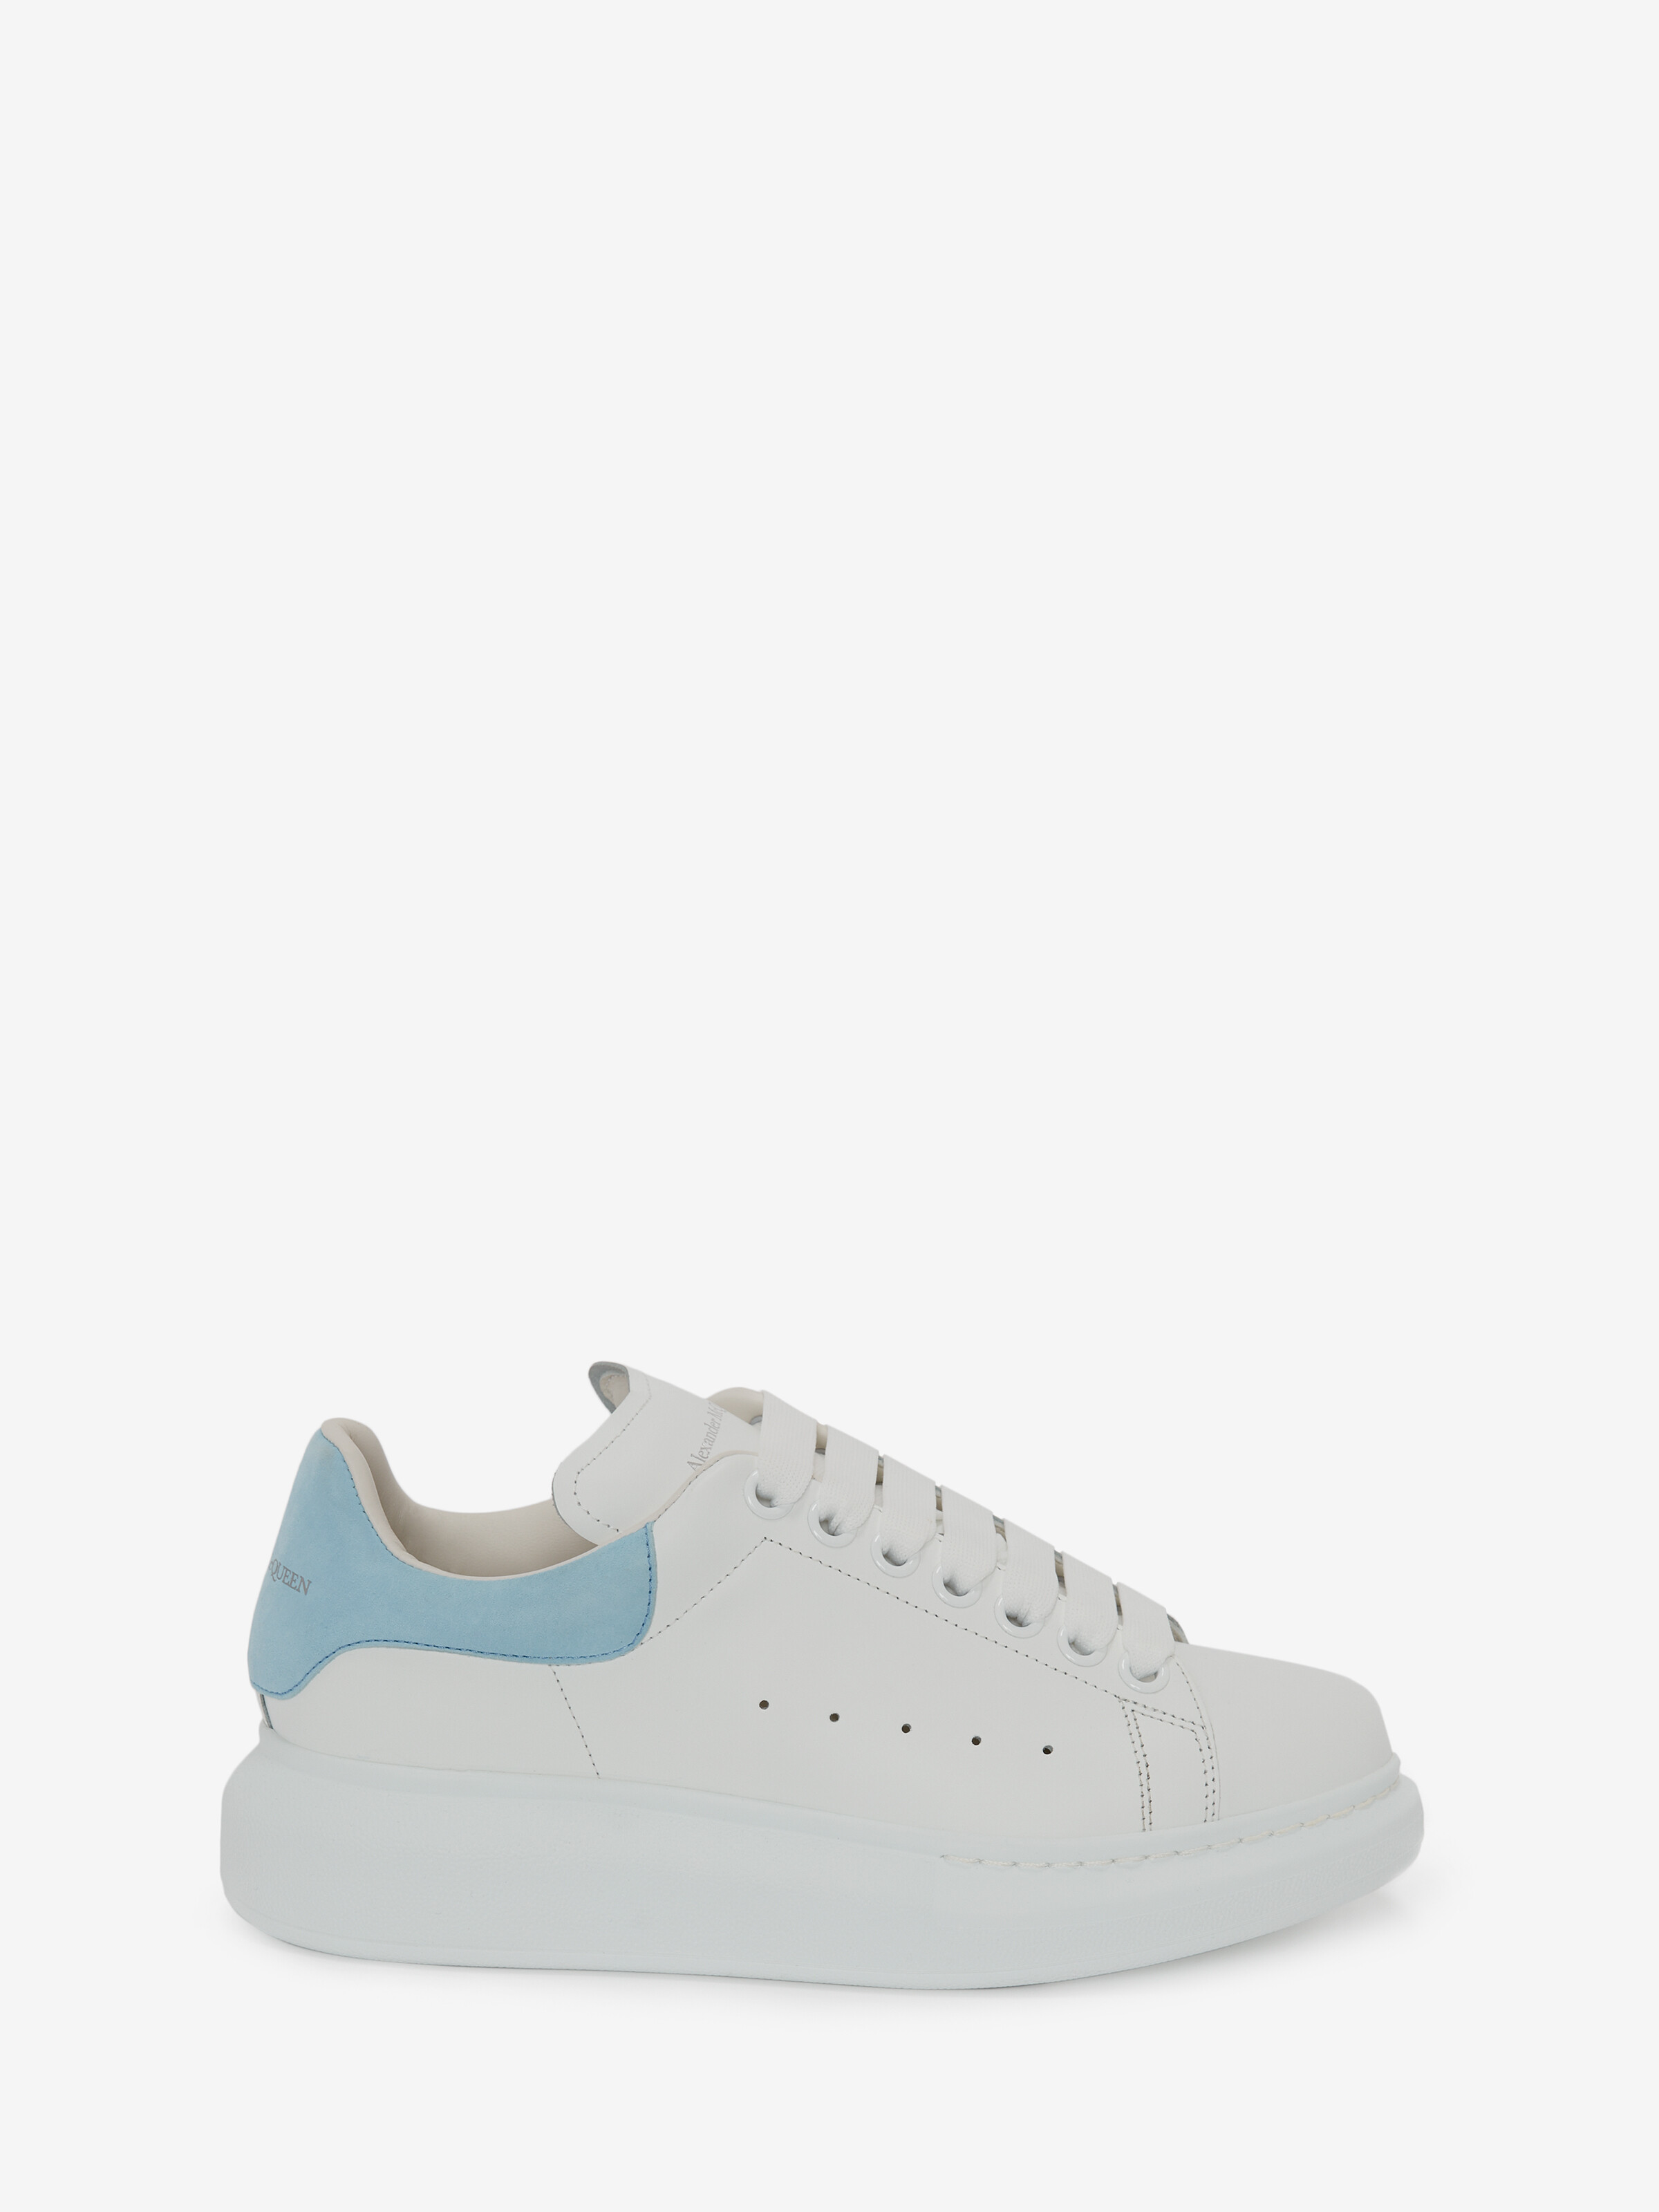 Alexander McQueen oversized sole sneakers white | MODES